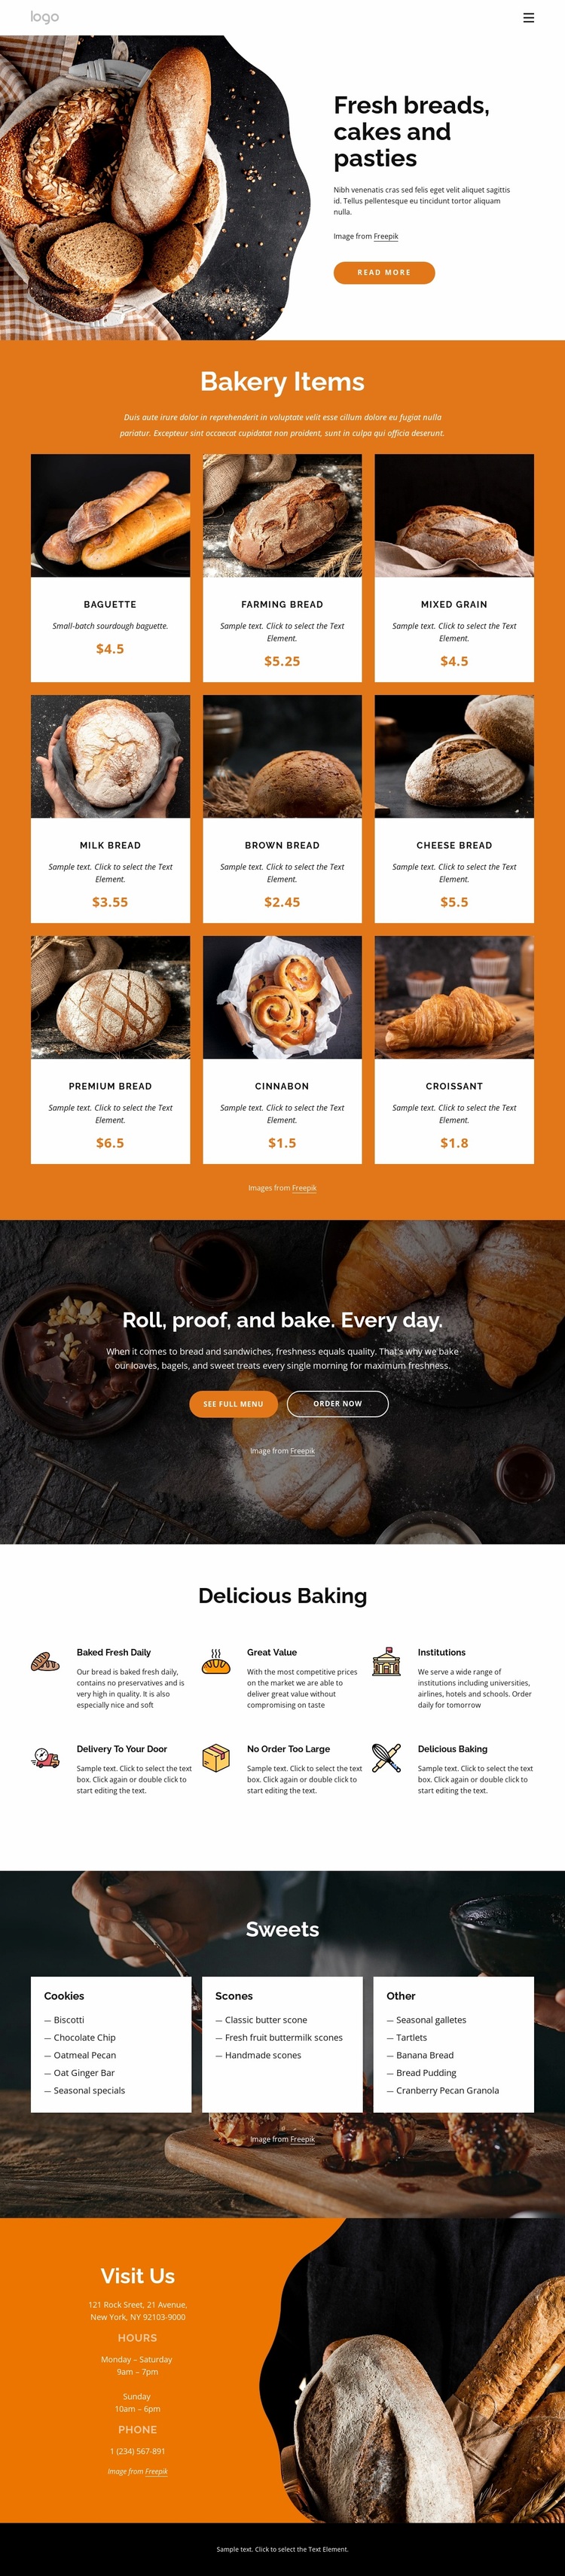 Fresh breads and cakes Website Design